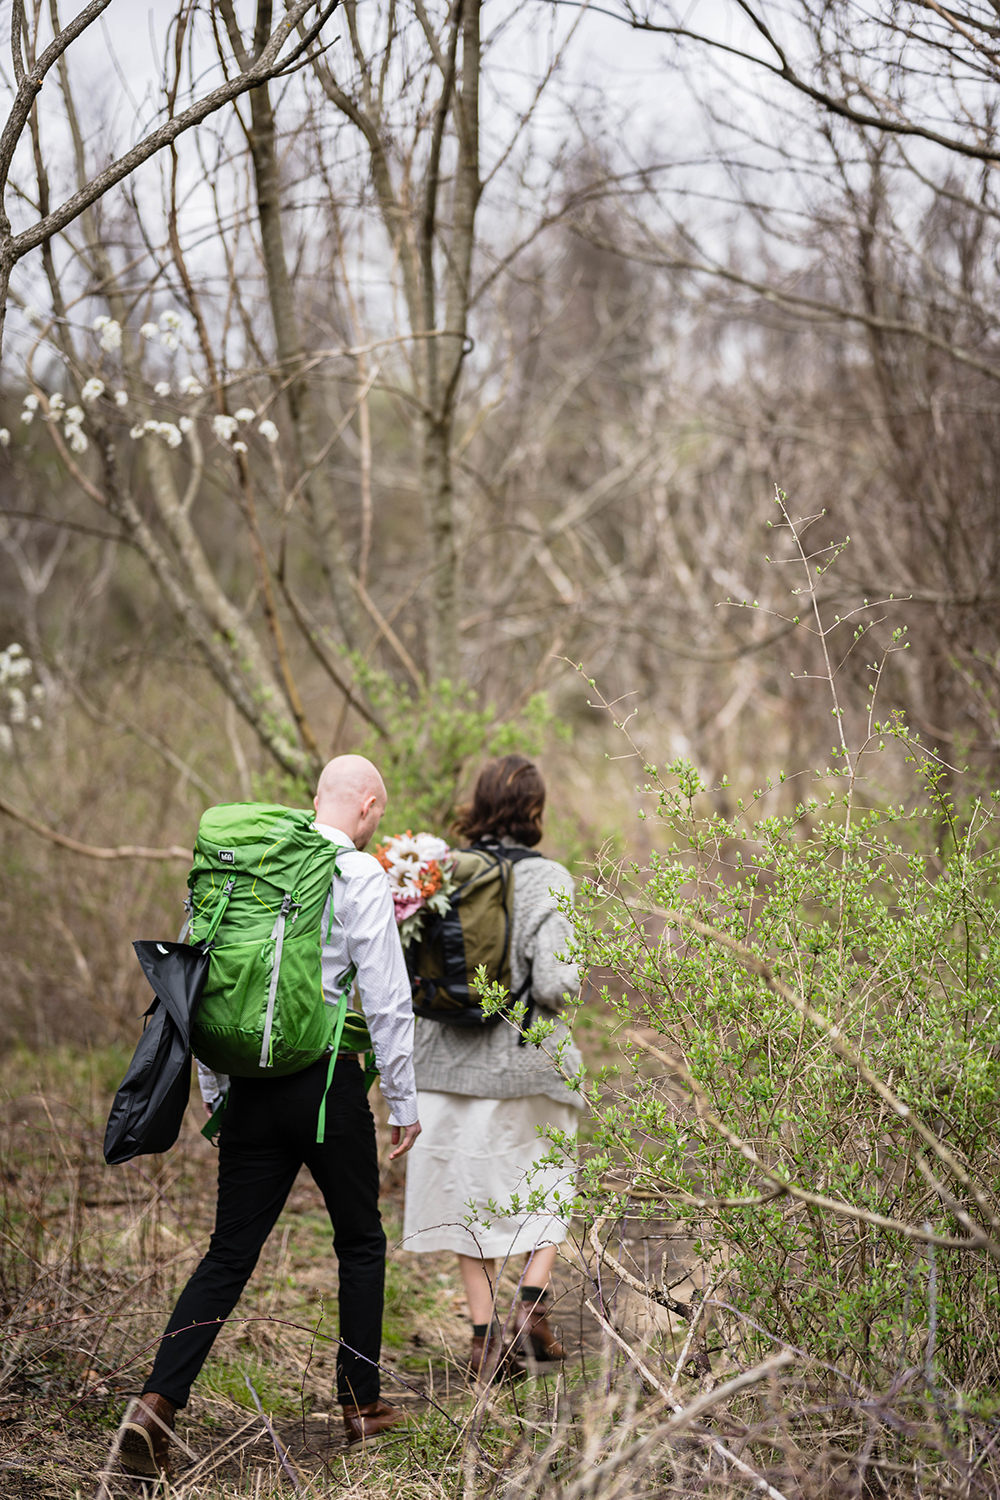 A bride wearing a hiking backpack with her bouquet leads the way on a trail followed by her groom who is also wearing a hiking backpack with a suit hanging on it.